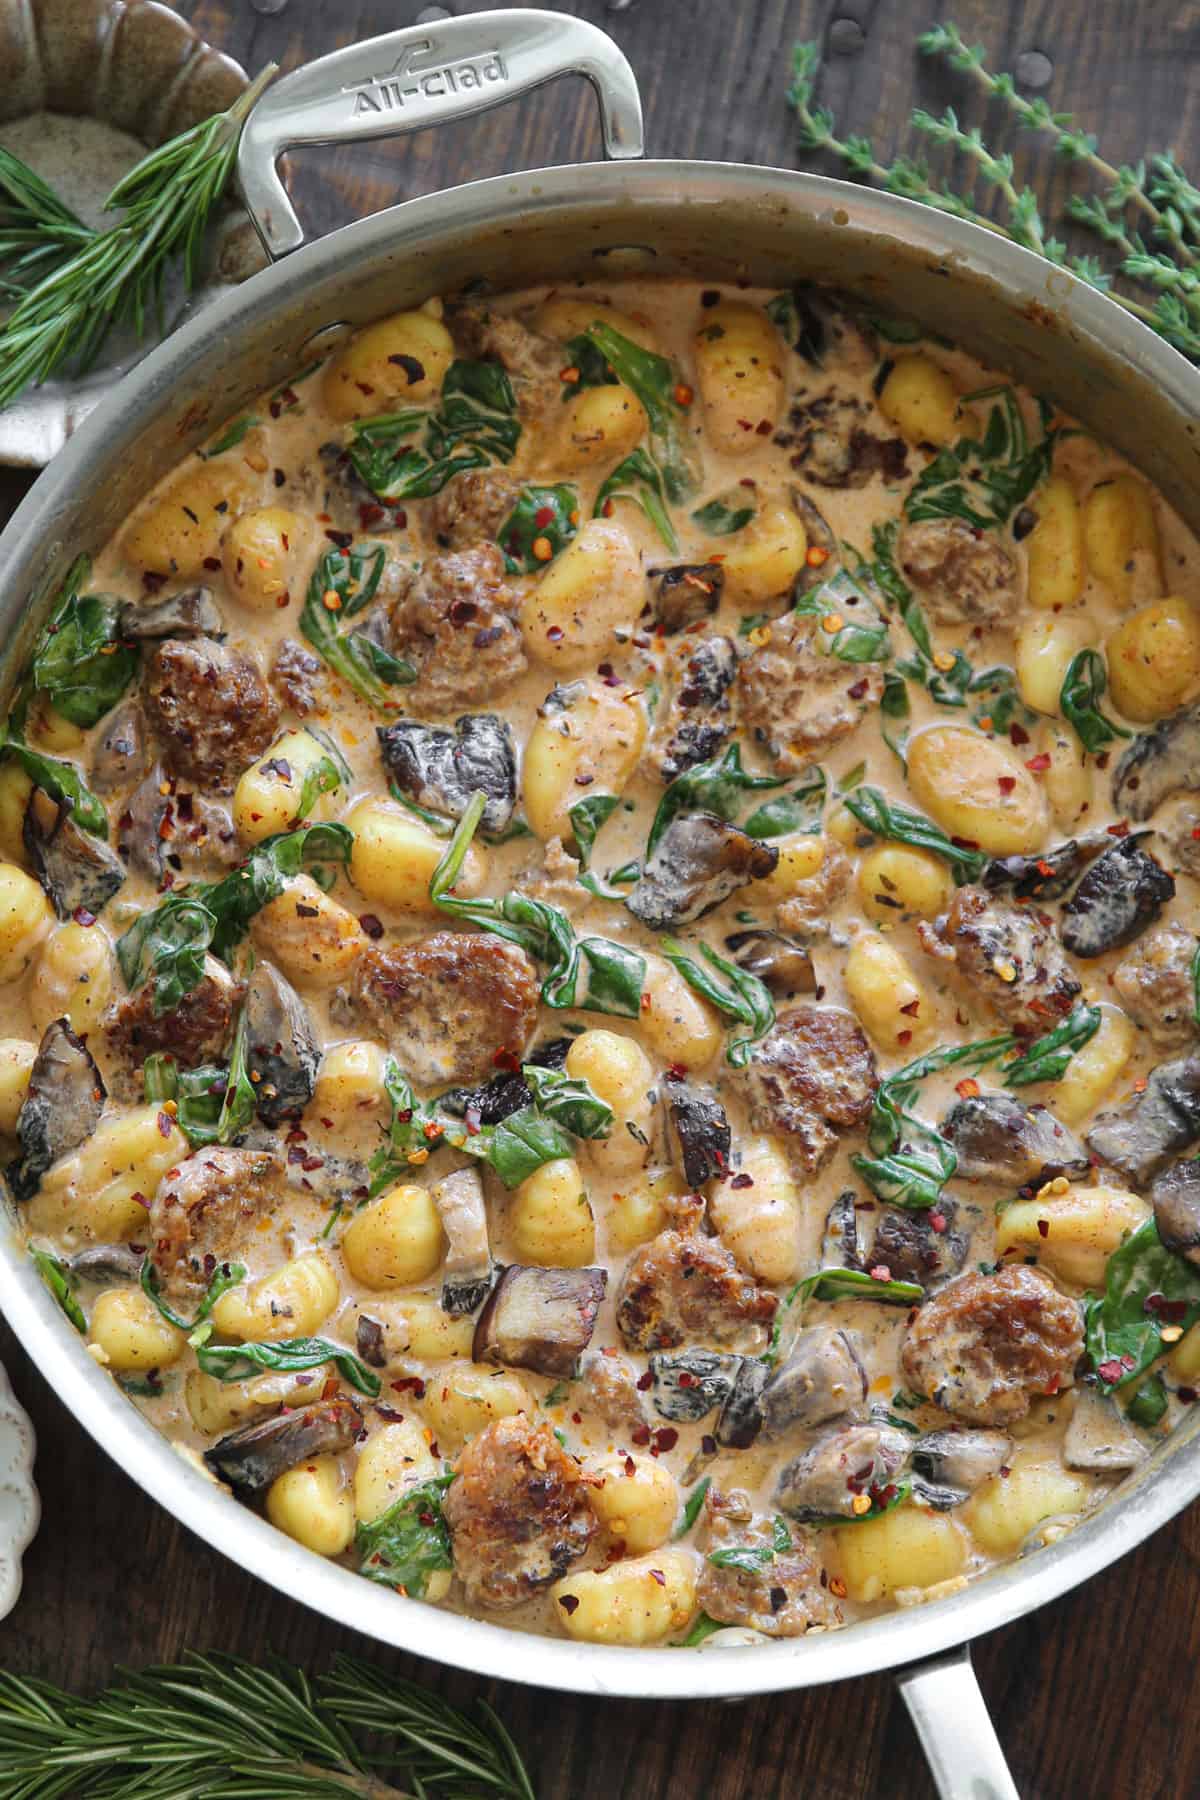 Creamy Gnocchi with Italian Sausage, Chopped Portobello Mushrooms, and Spinach - in a stainless steel skillet.